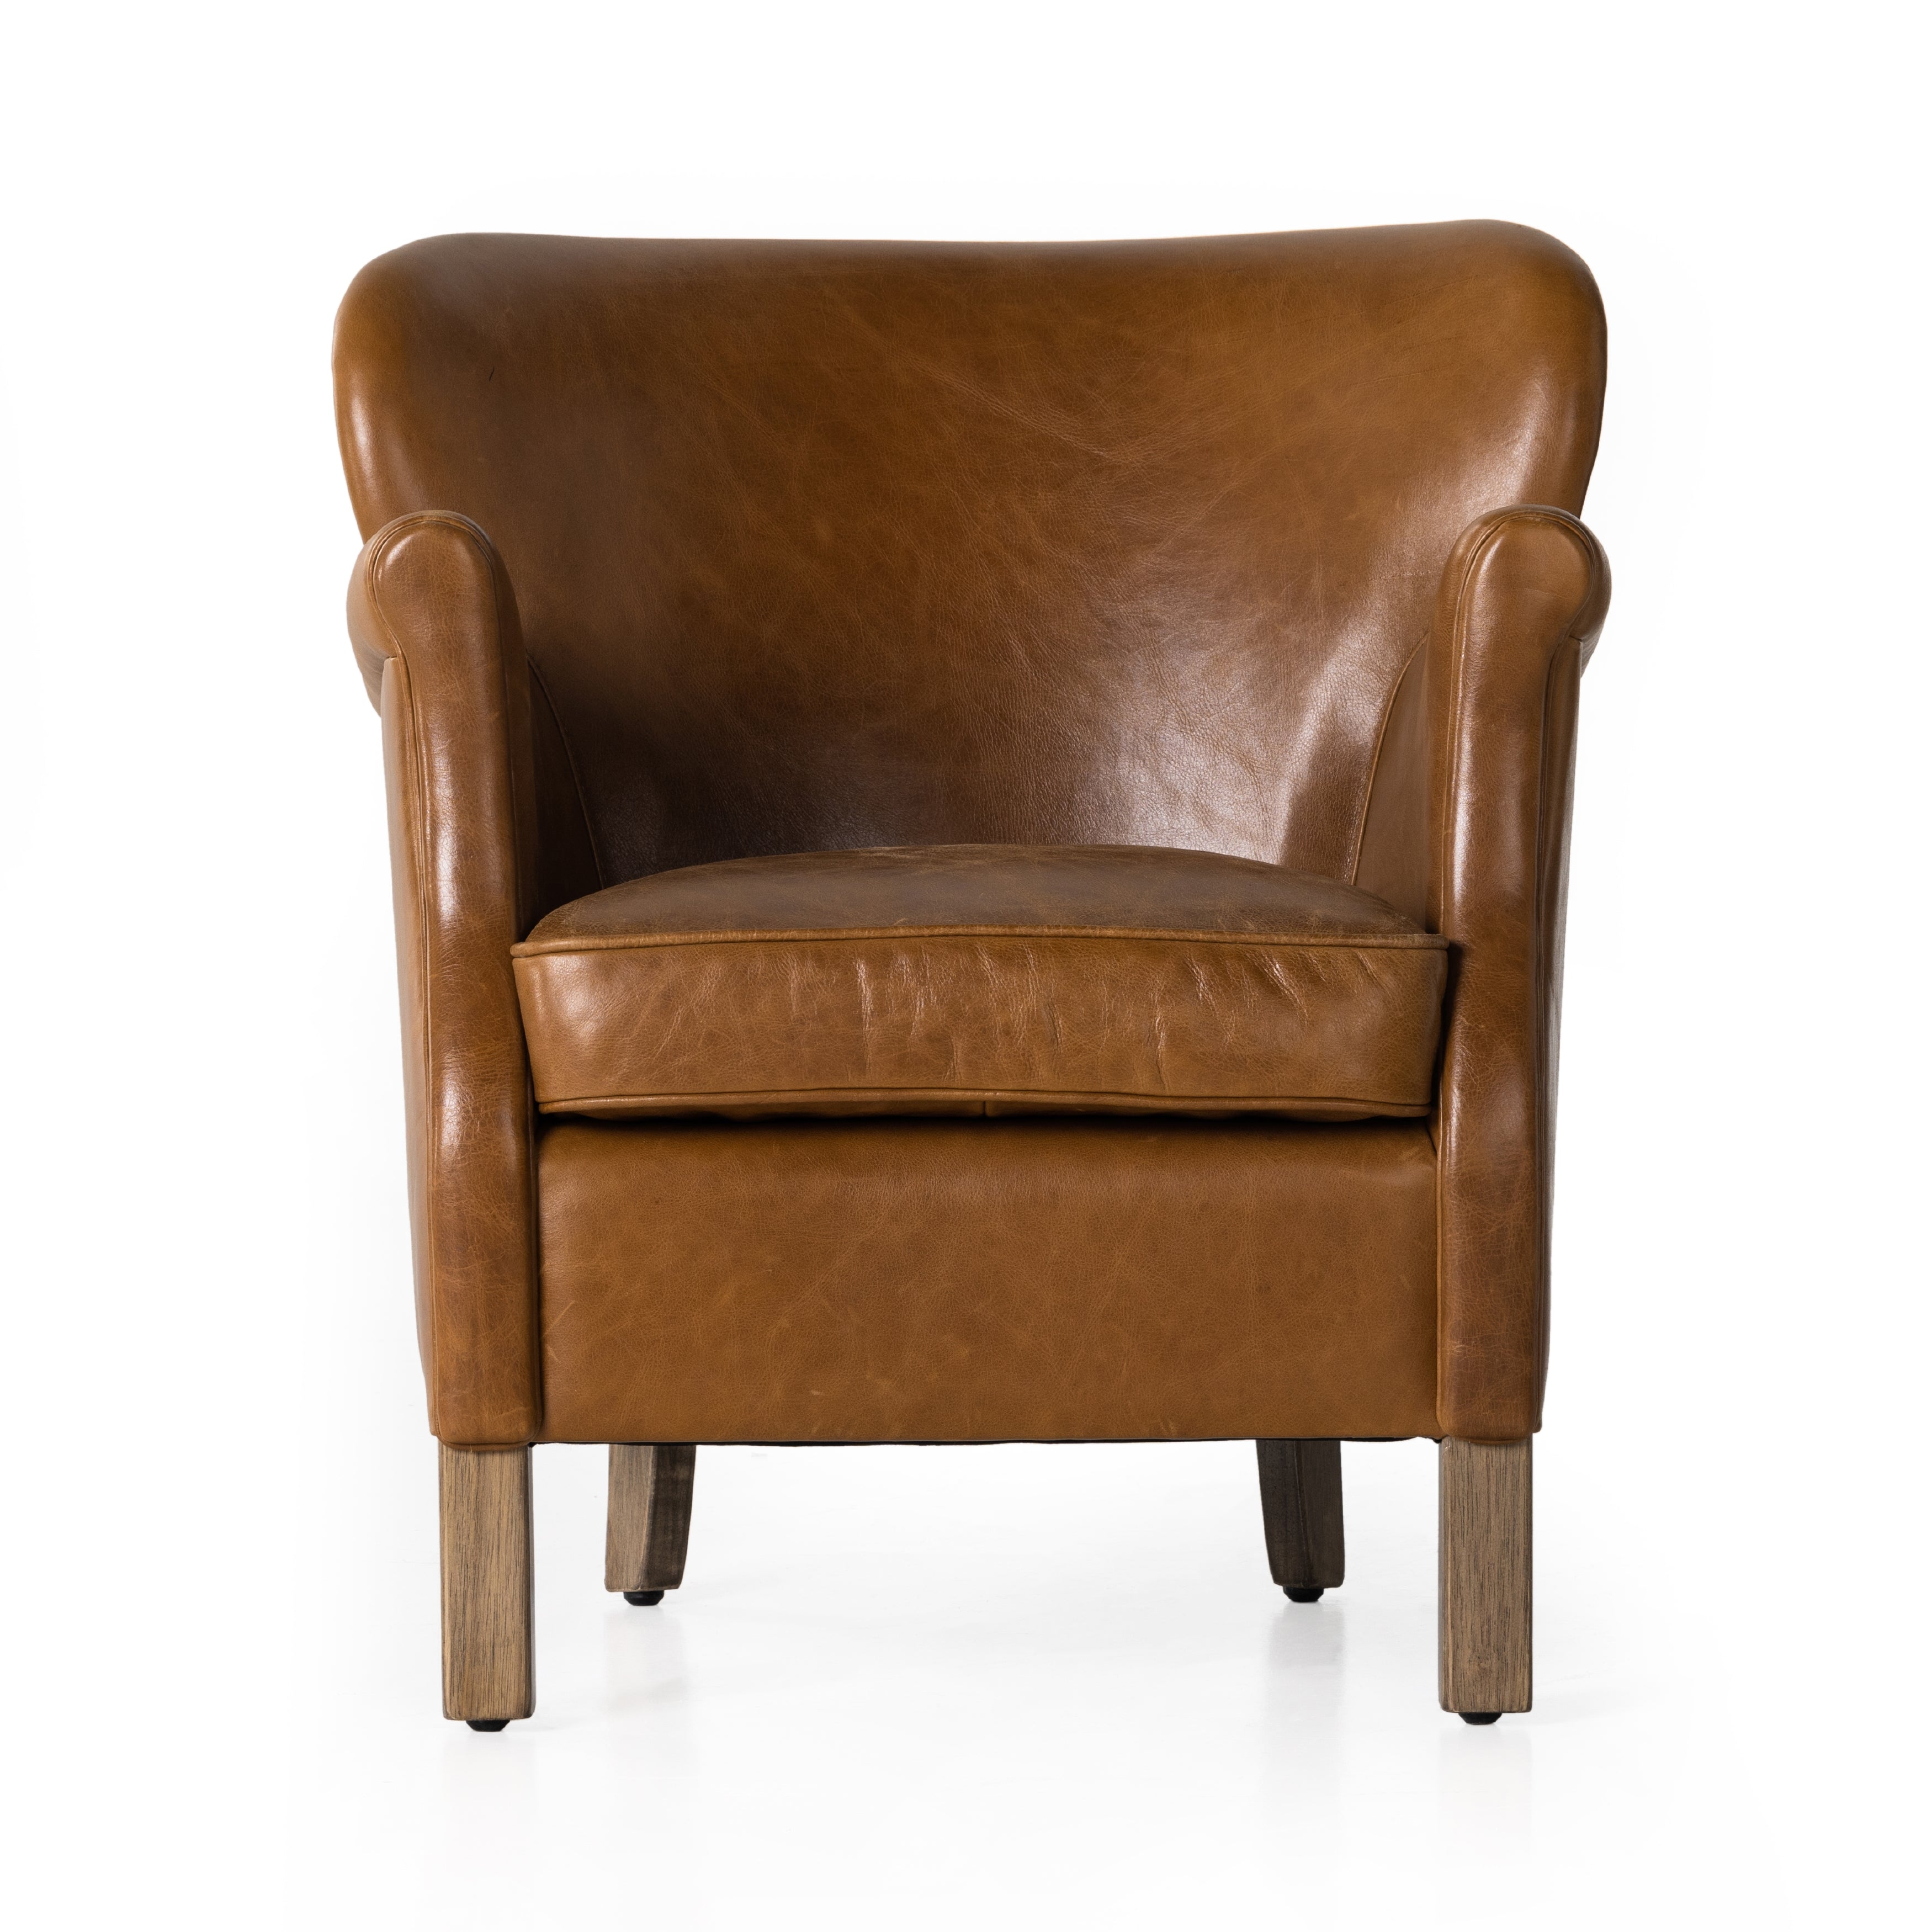 A statement seat all its own. This regal Parisian club chair is honored with a profound scooped back and rolled arms in classic, lived in tan top-grain leather. Amethyst Home provides interior design, new construction, custom furniture, and area rugs in the Washington metro area.